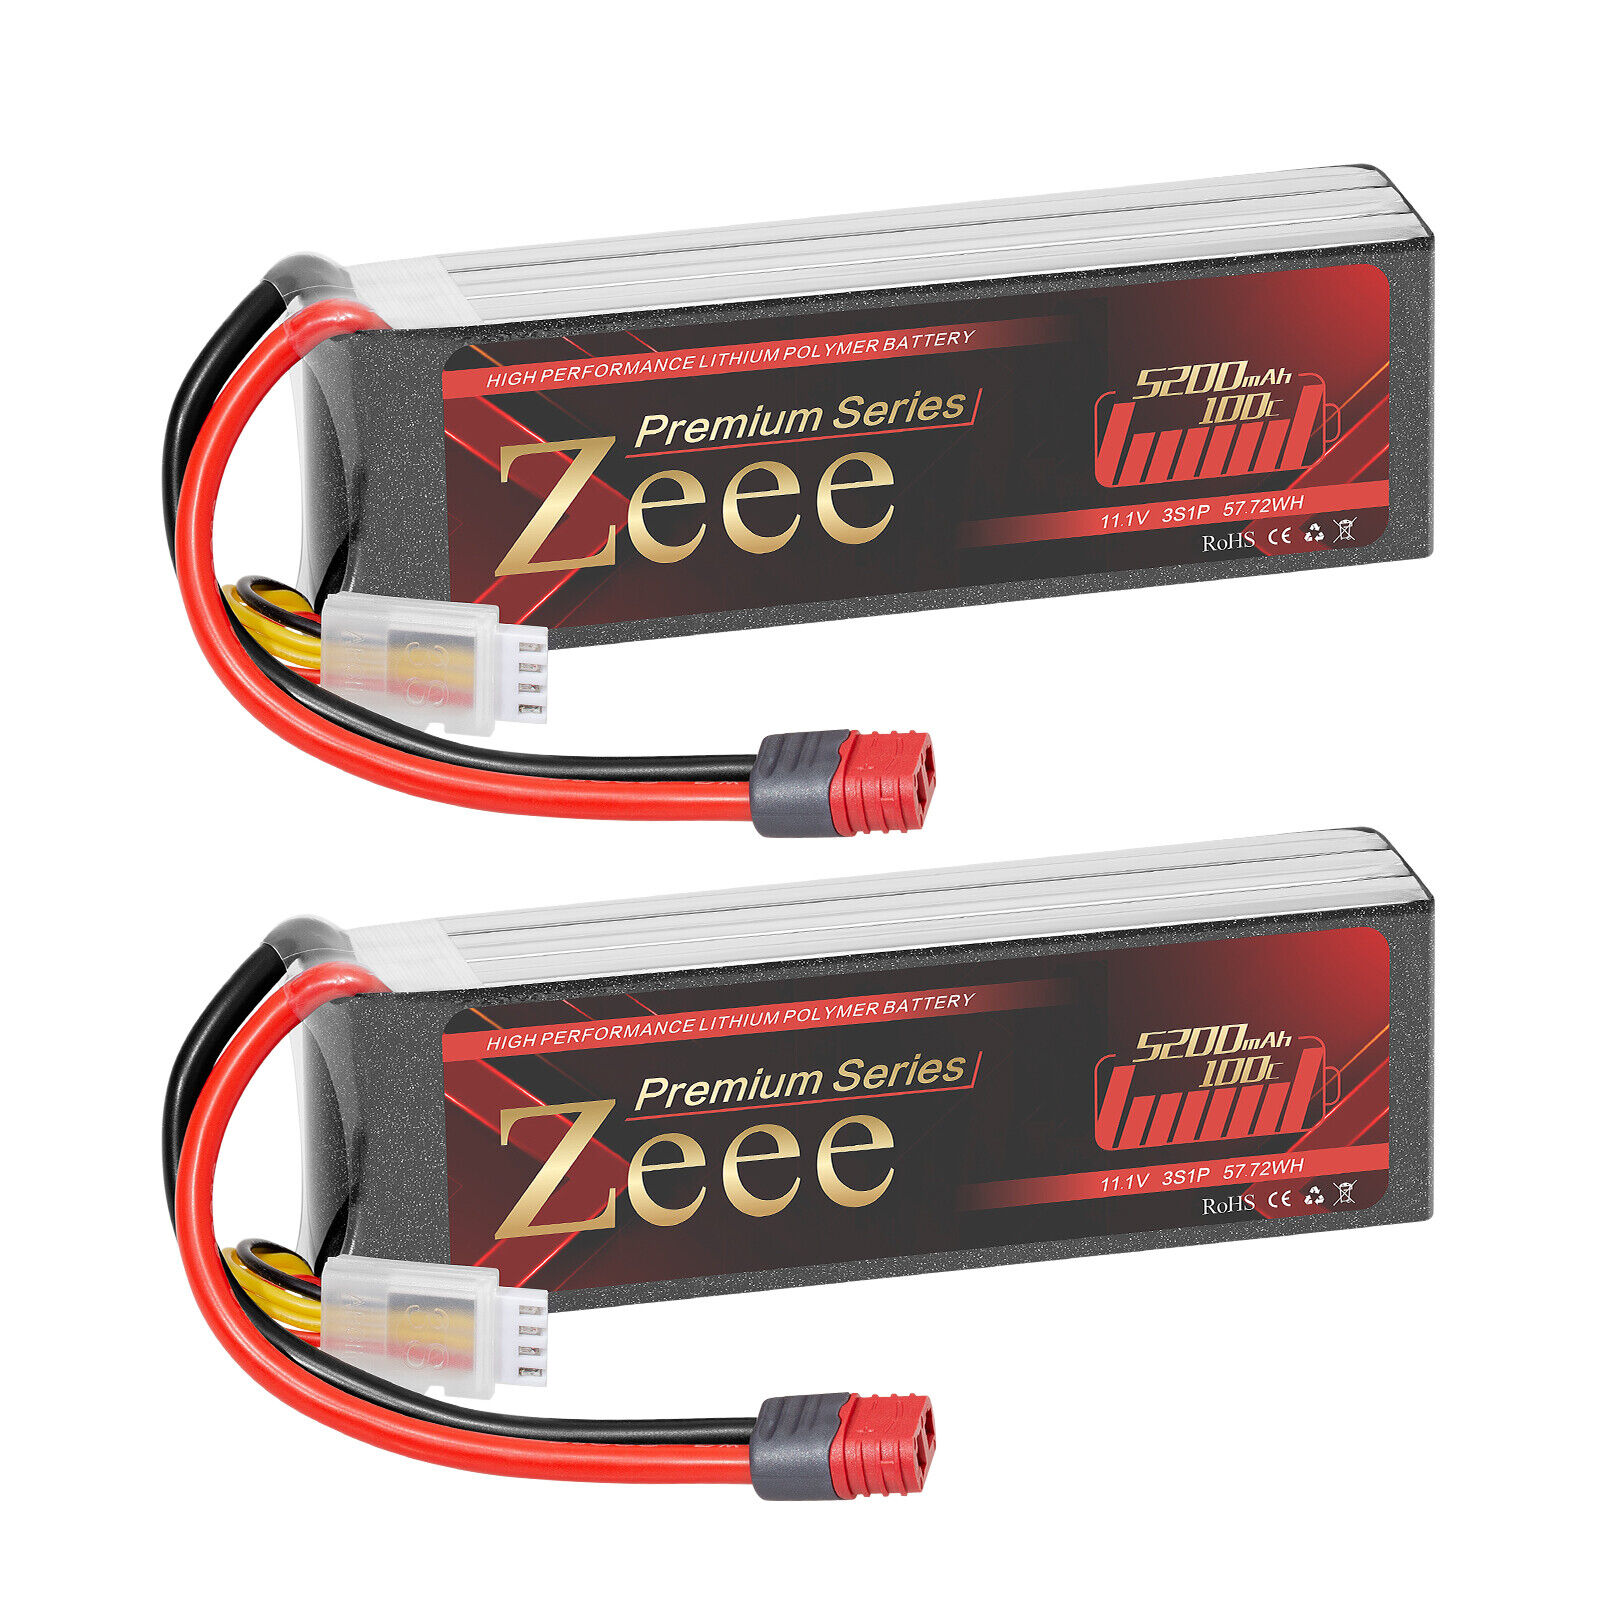 2x Zeee 3S LiPo Battery 11.1V 100C 5200mAh Deans for RC Car Helicopter Truck ZEEE Does Not Apply